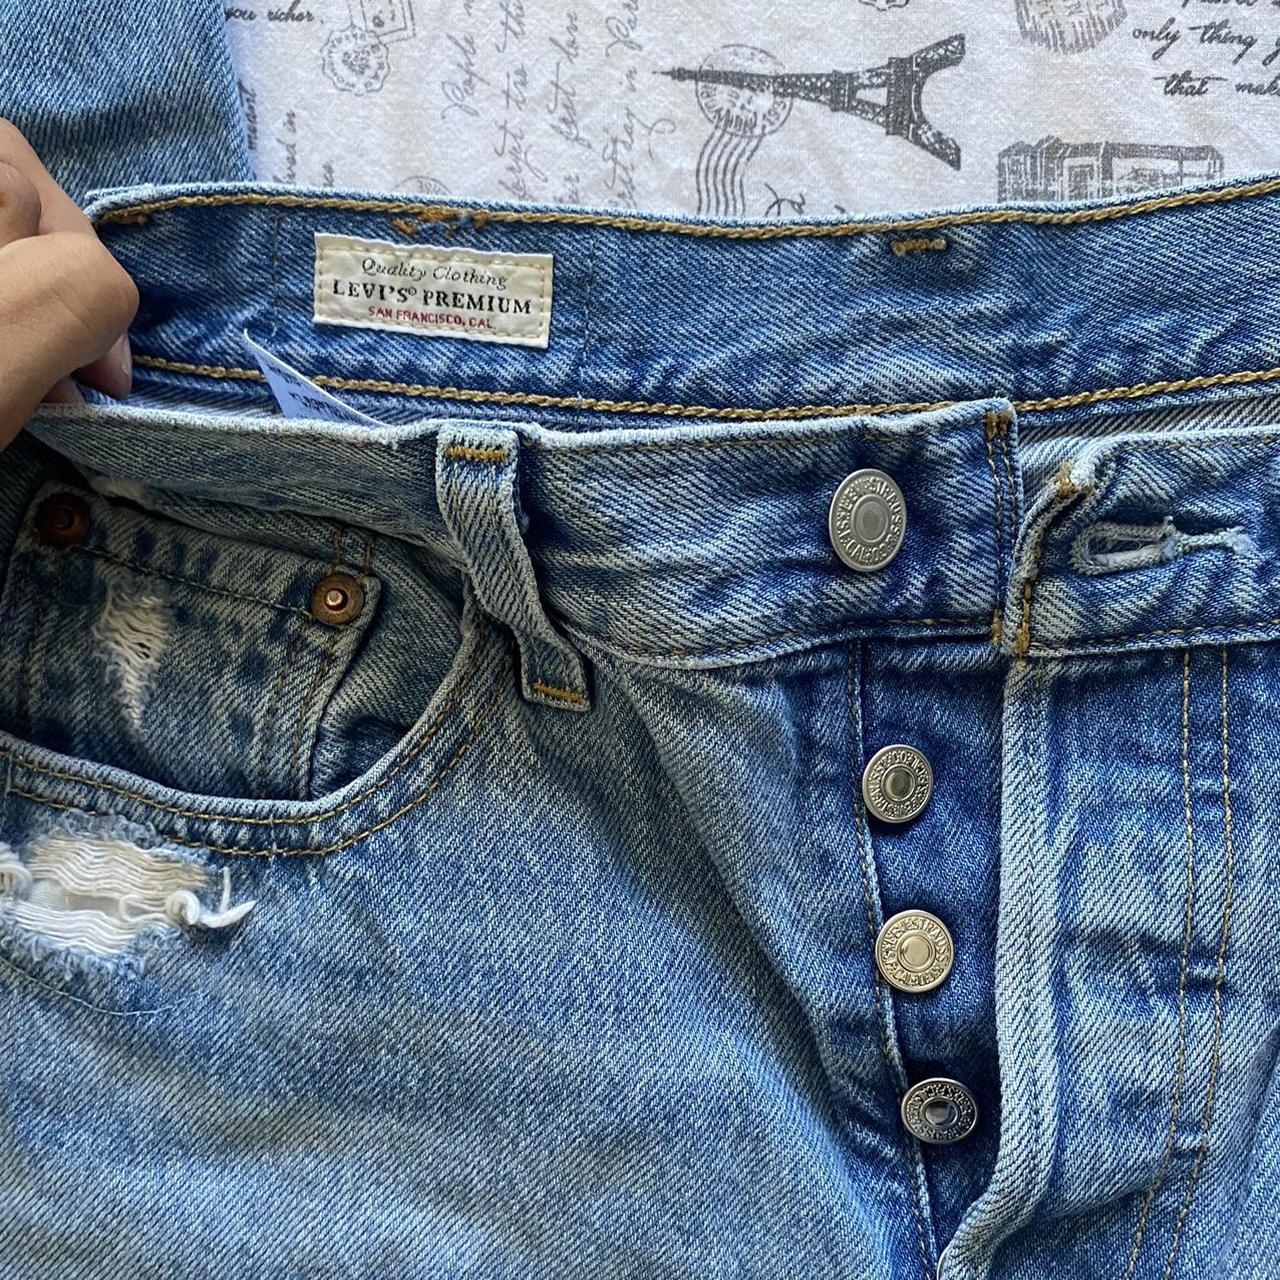 levi’s premium vintage ripped high waisted jeans 501... - Depop